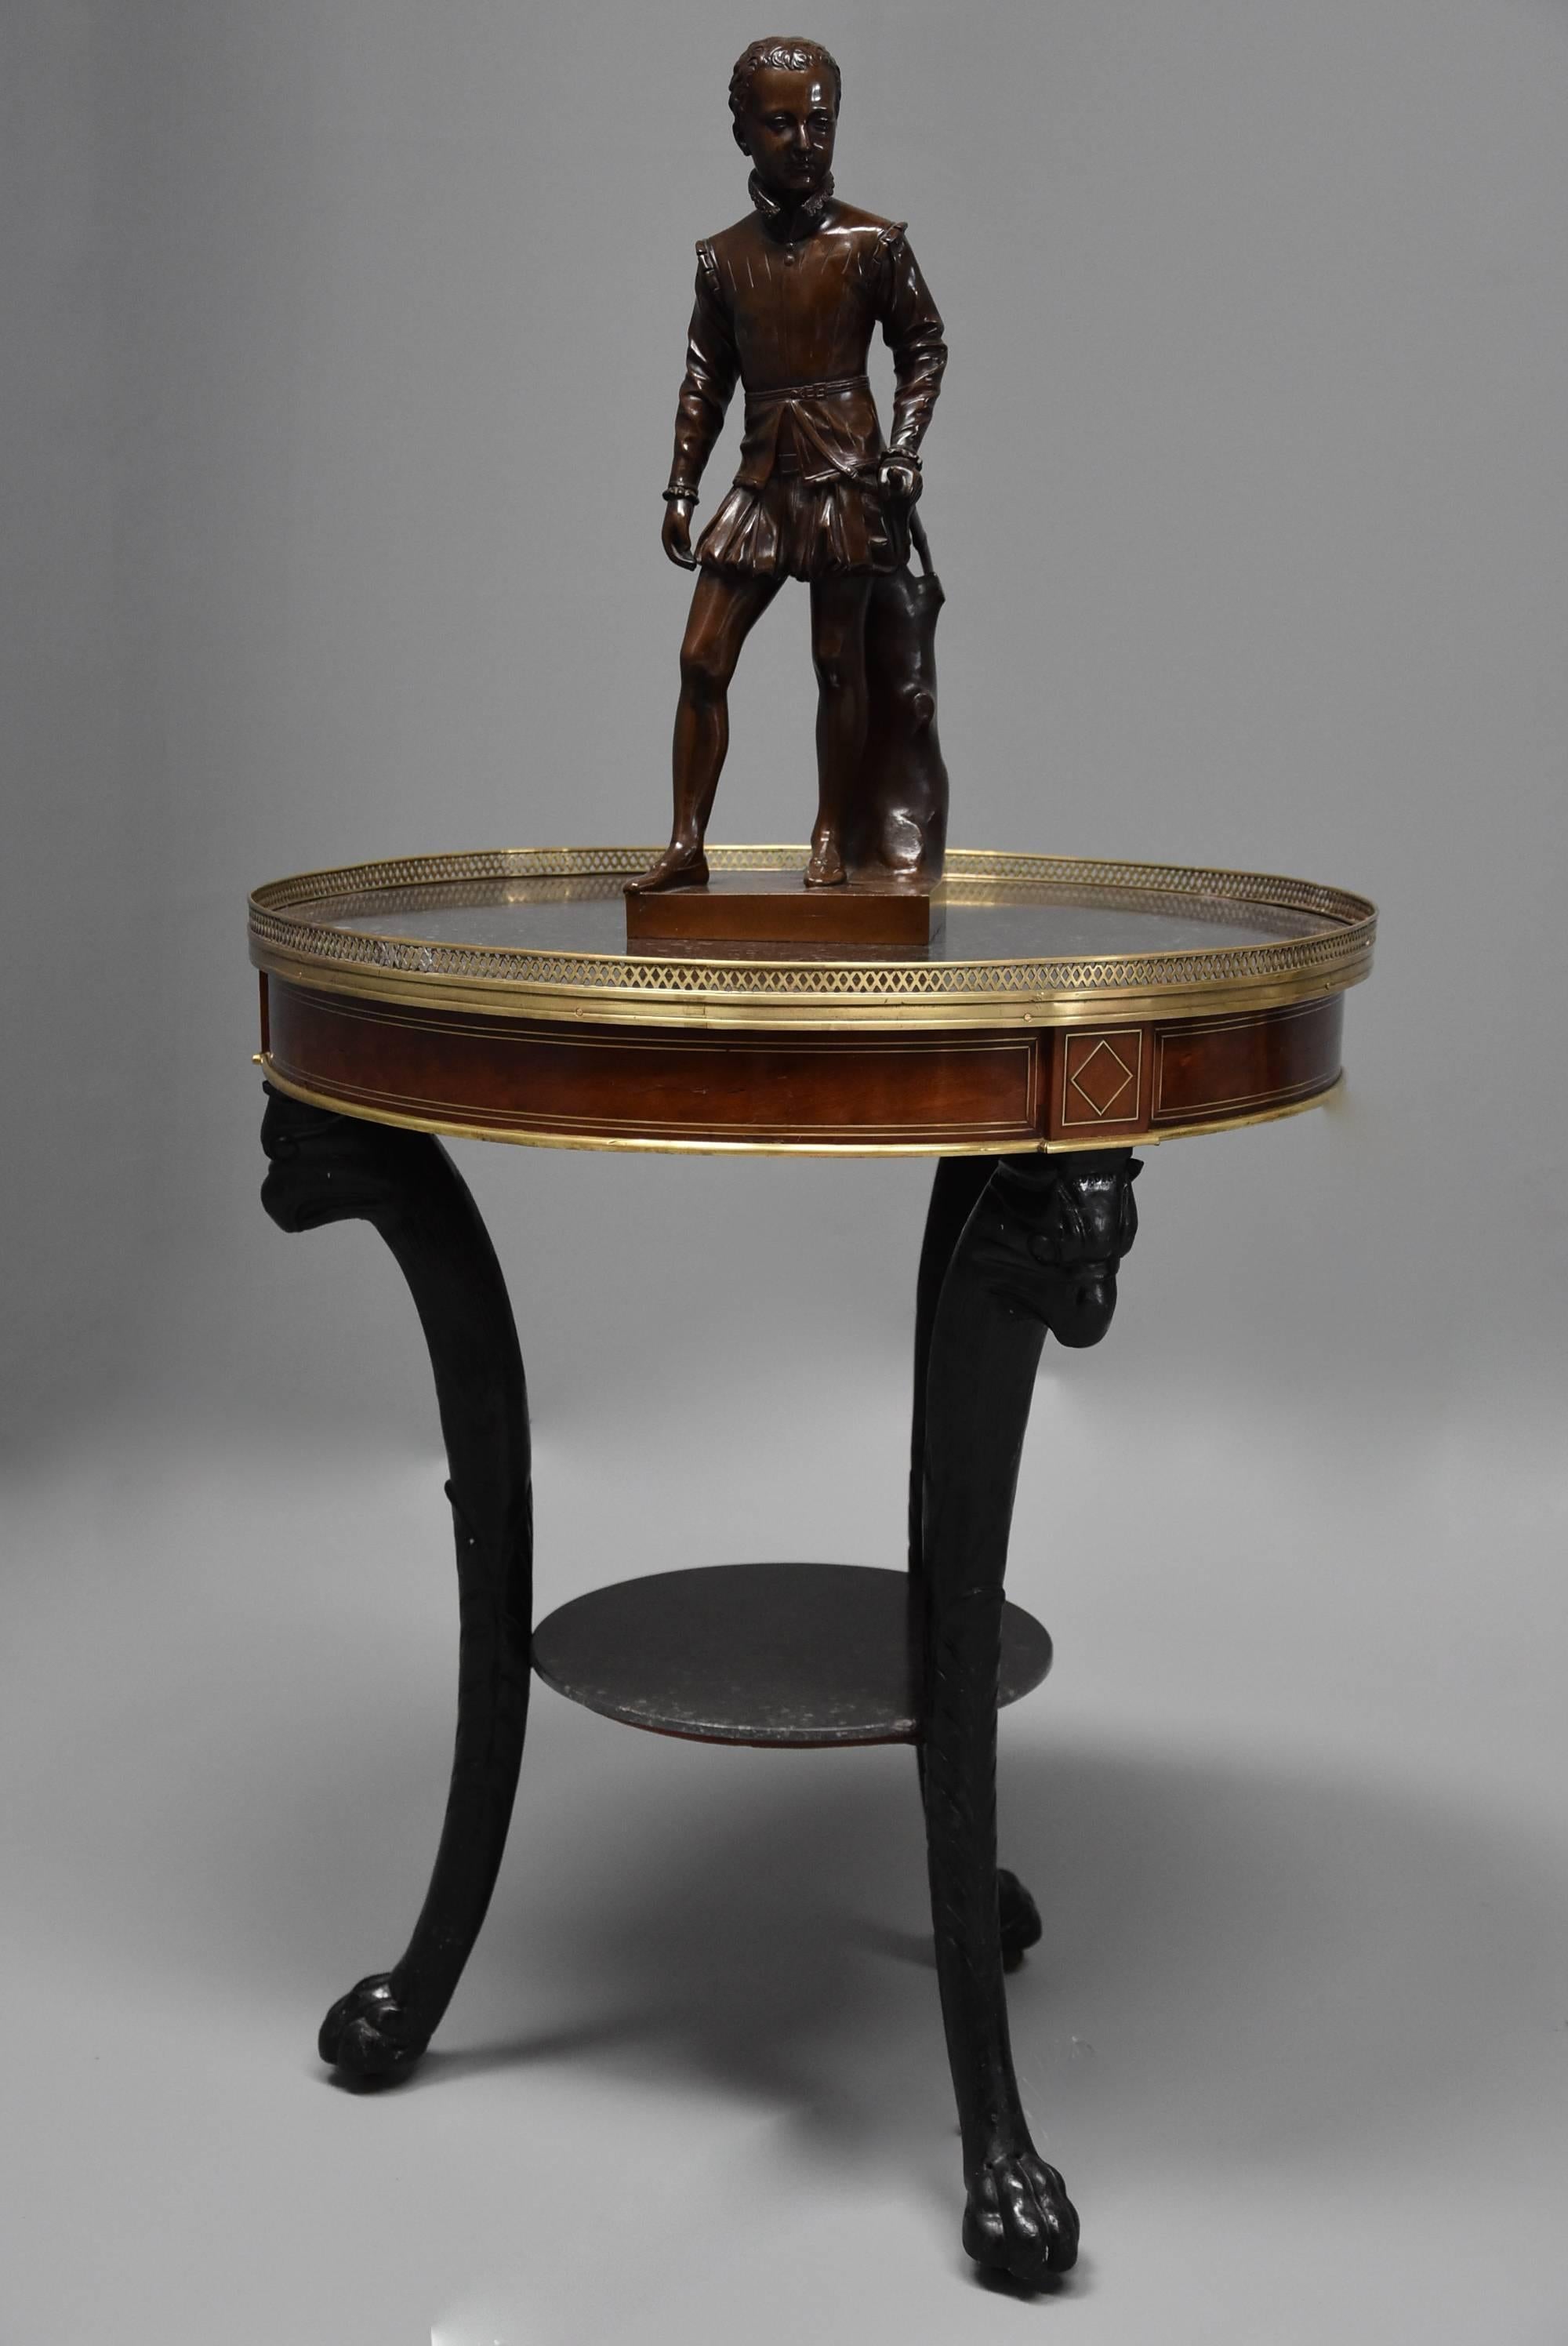 A highly decorative late 18th-early 19th century French Empire mahogany and marble gueridon table.

This table consists of an original St Anne marble top in grey/black tones in very good condition, the marble surrounded by a pierced lattice brass